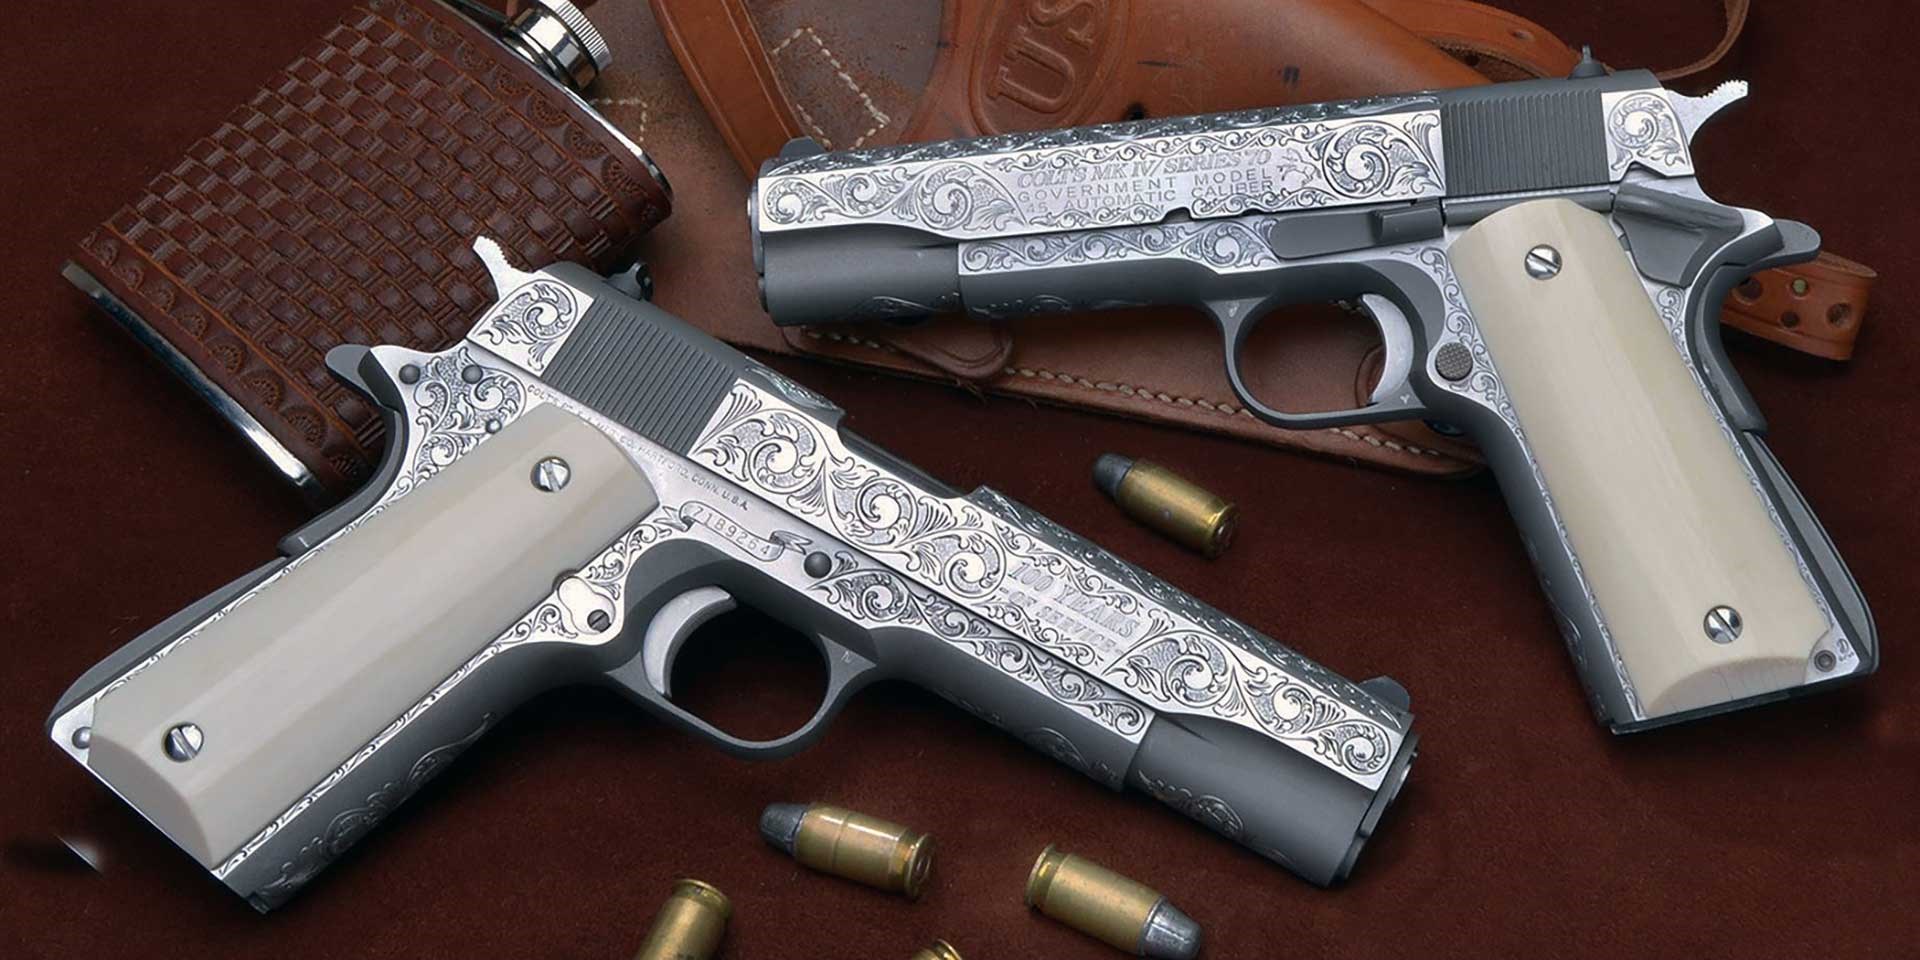 Two Colt M1911 handguns with highly figured engraving on their metal components.